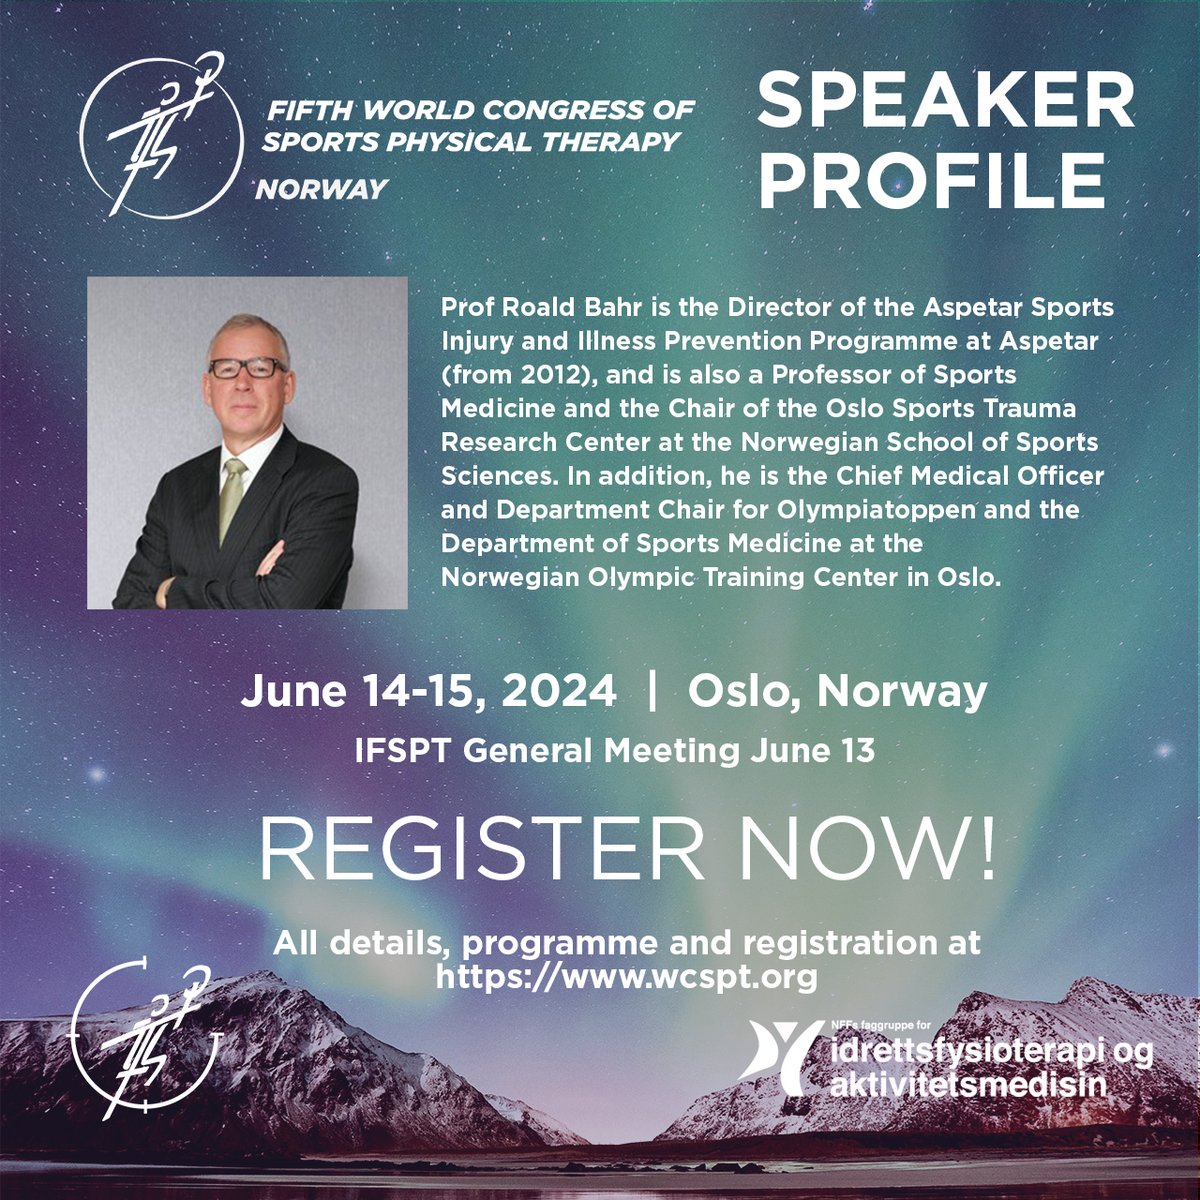 Join speaker Roald Bahr at the Fifth World Congress of Sports Physical Therapy, June 14-15 in Oslo! REGISTER NOW! wcspt.org